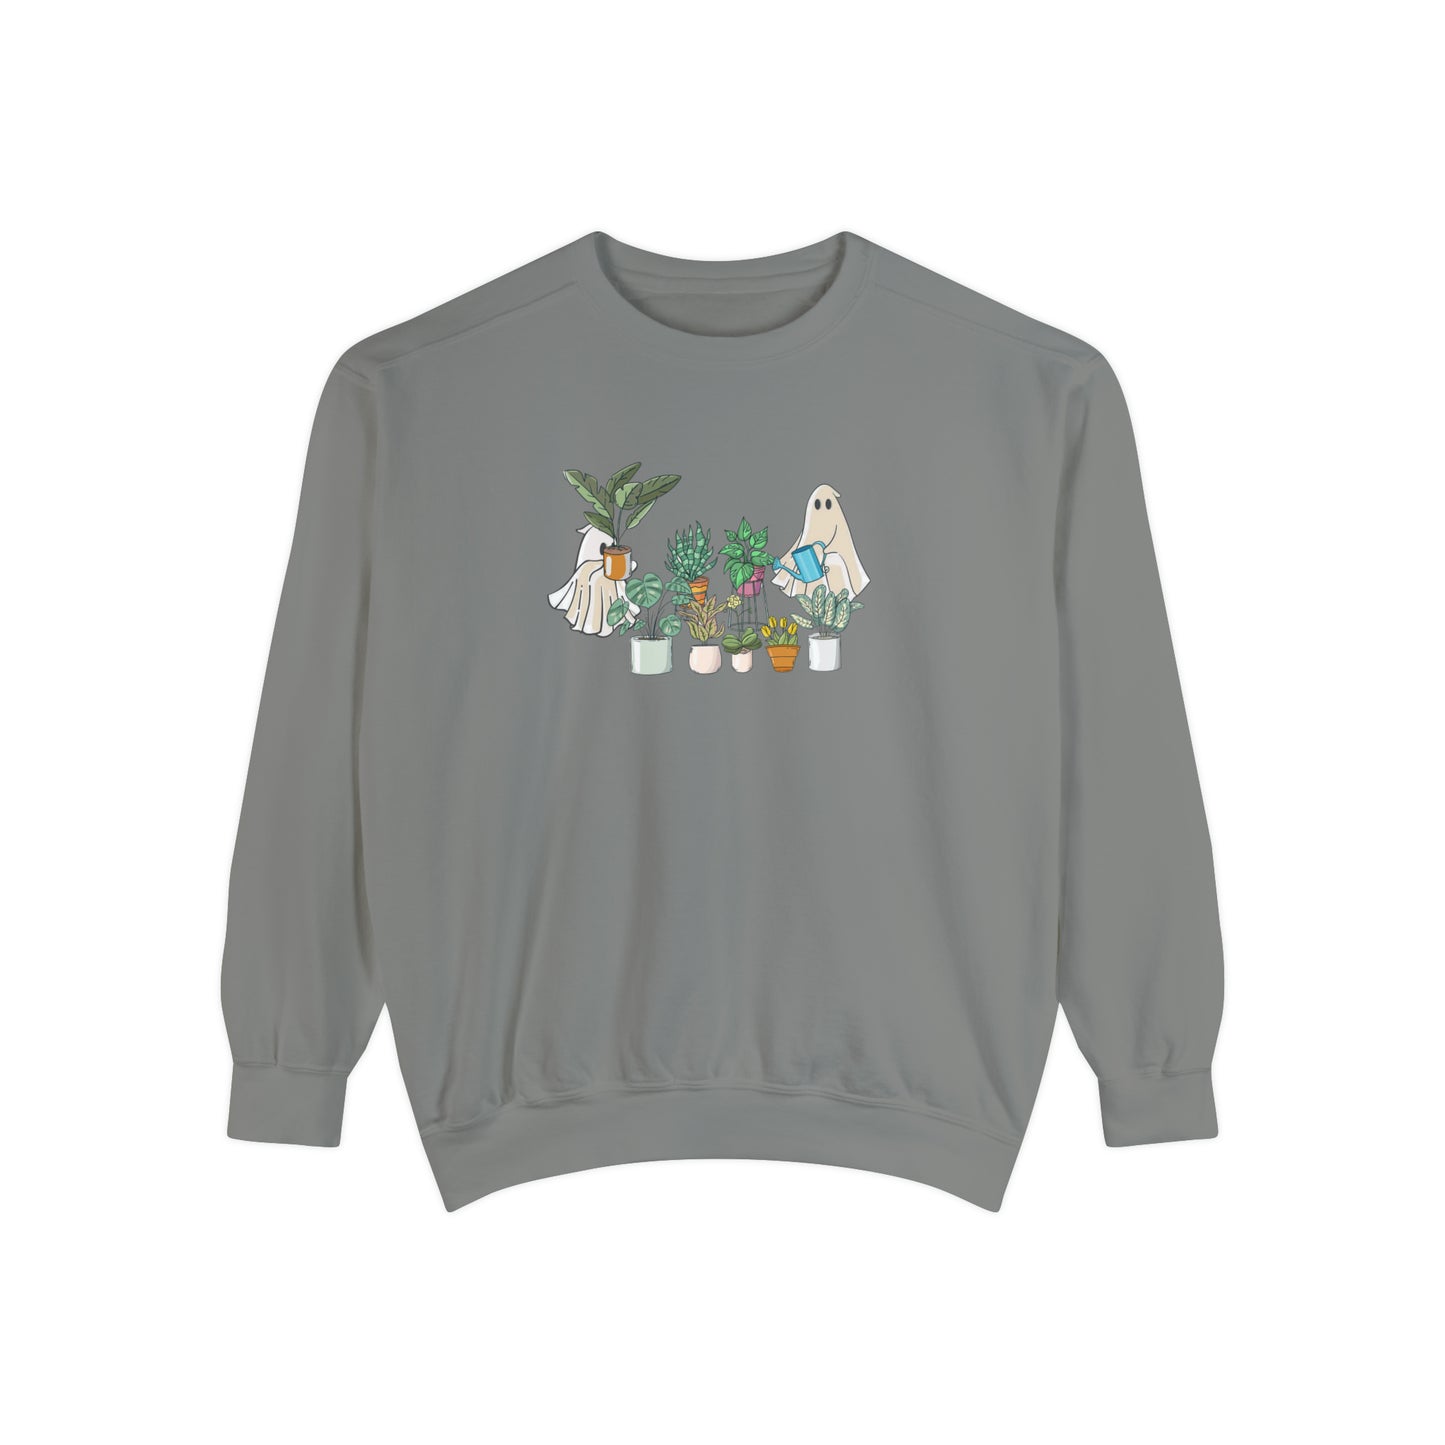 Plants and ghosts Unisex Sweatshirt for plant daddy, plant lover or gardener. Crazy plant lady sweatshirt with ghosts.